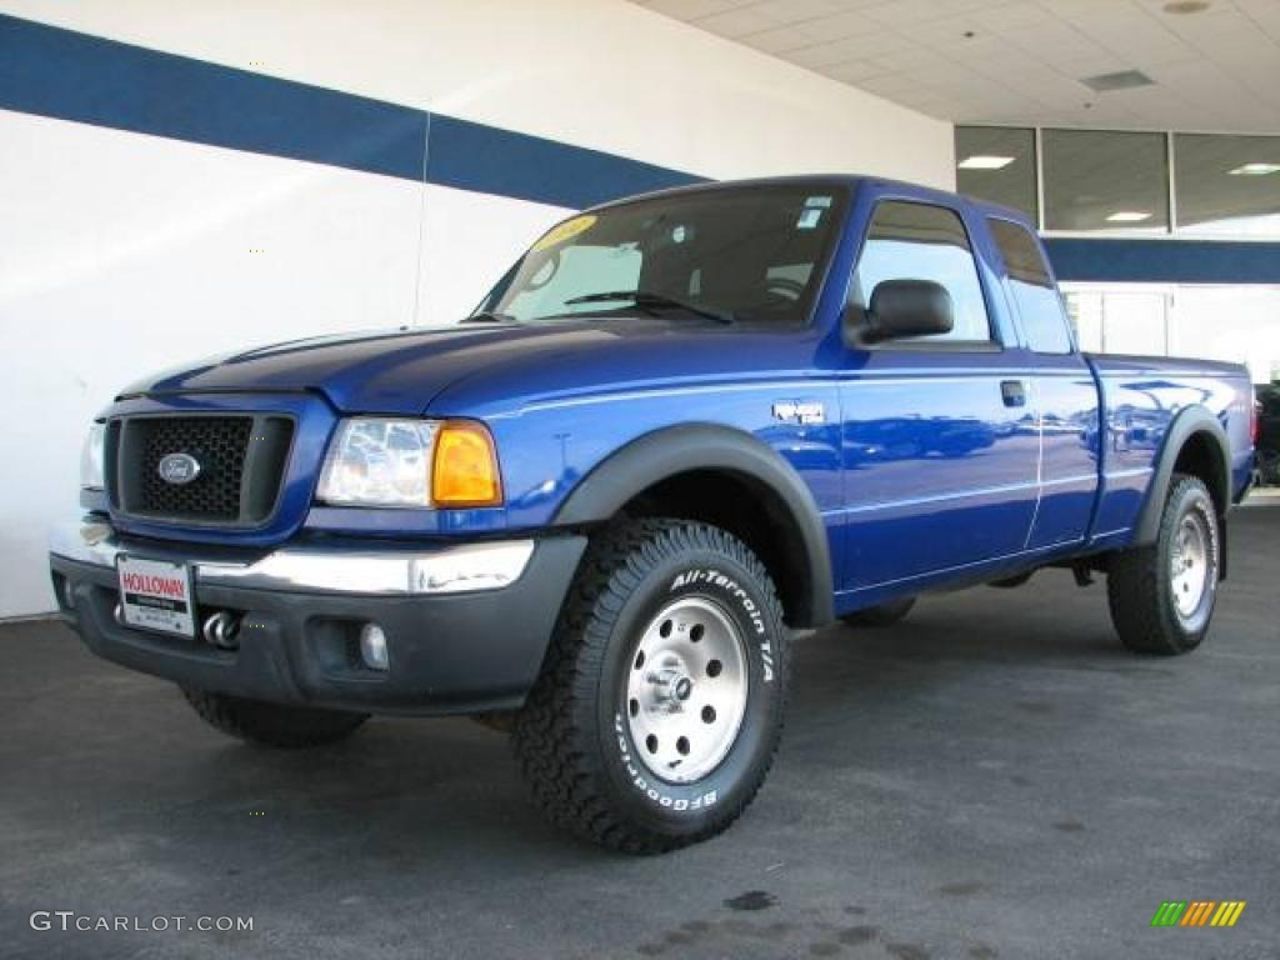 2005 Ford Ranger FX4 Off-Road | Sioux Falls, SD, Sonic Blue Clearcoat Metallic (Blue), 4 Wheel